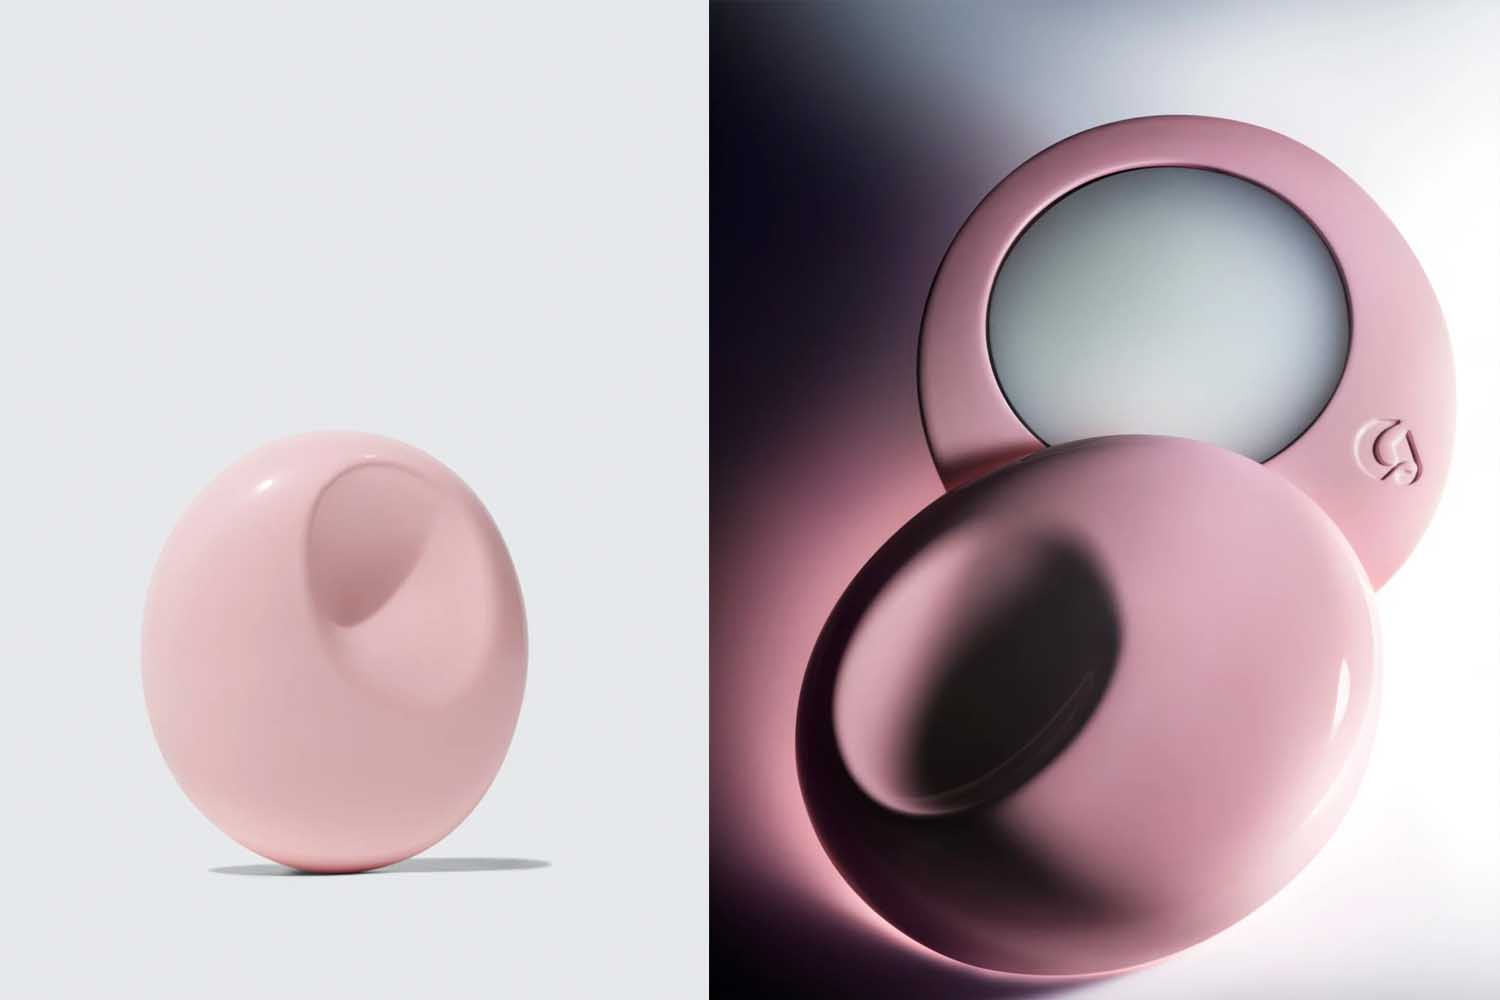 Two photos of Glossier's solid "You" fragrance, a pink compact, a perfect Valentine’s Day gift for 2022.